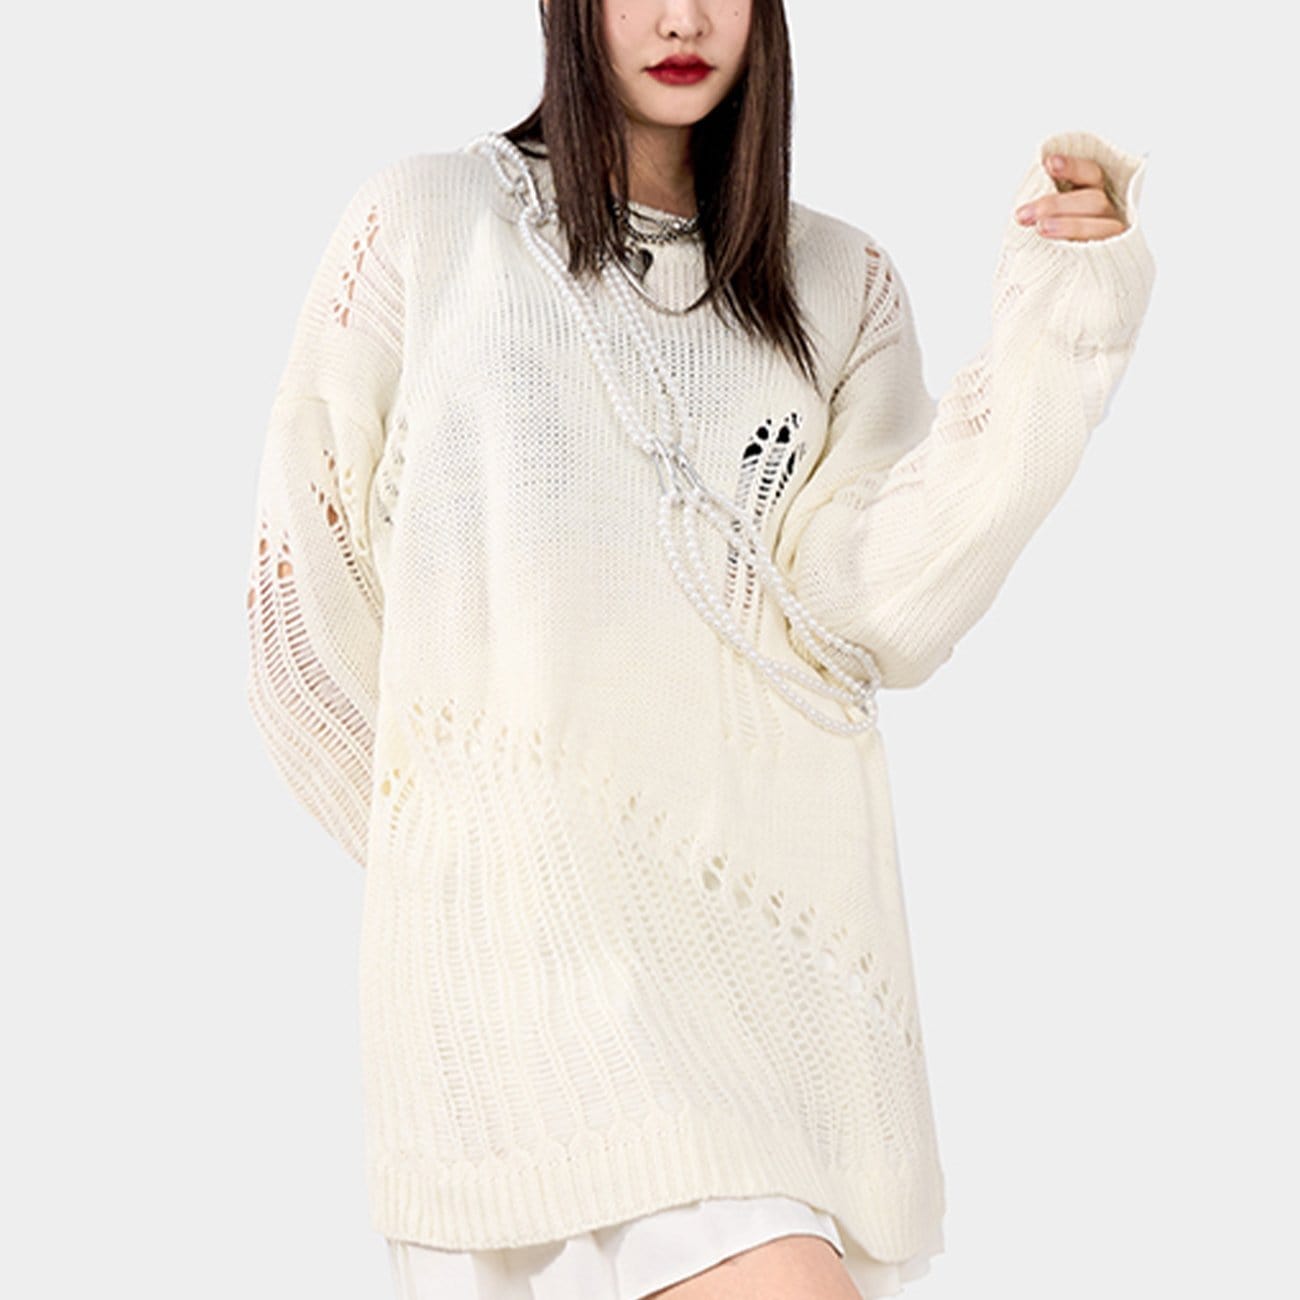 TO Ripped Hole Knitted Sweater